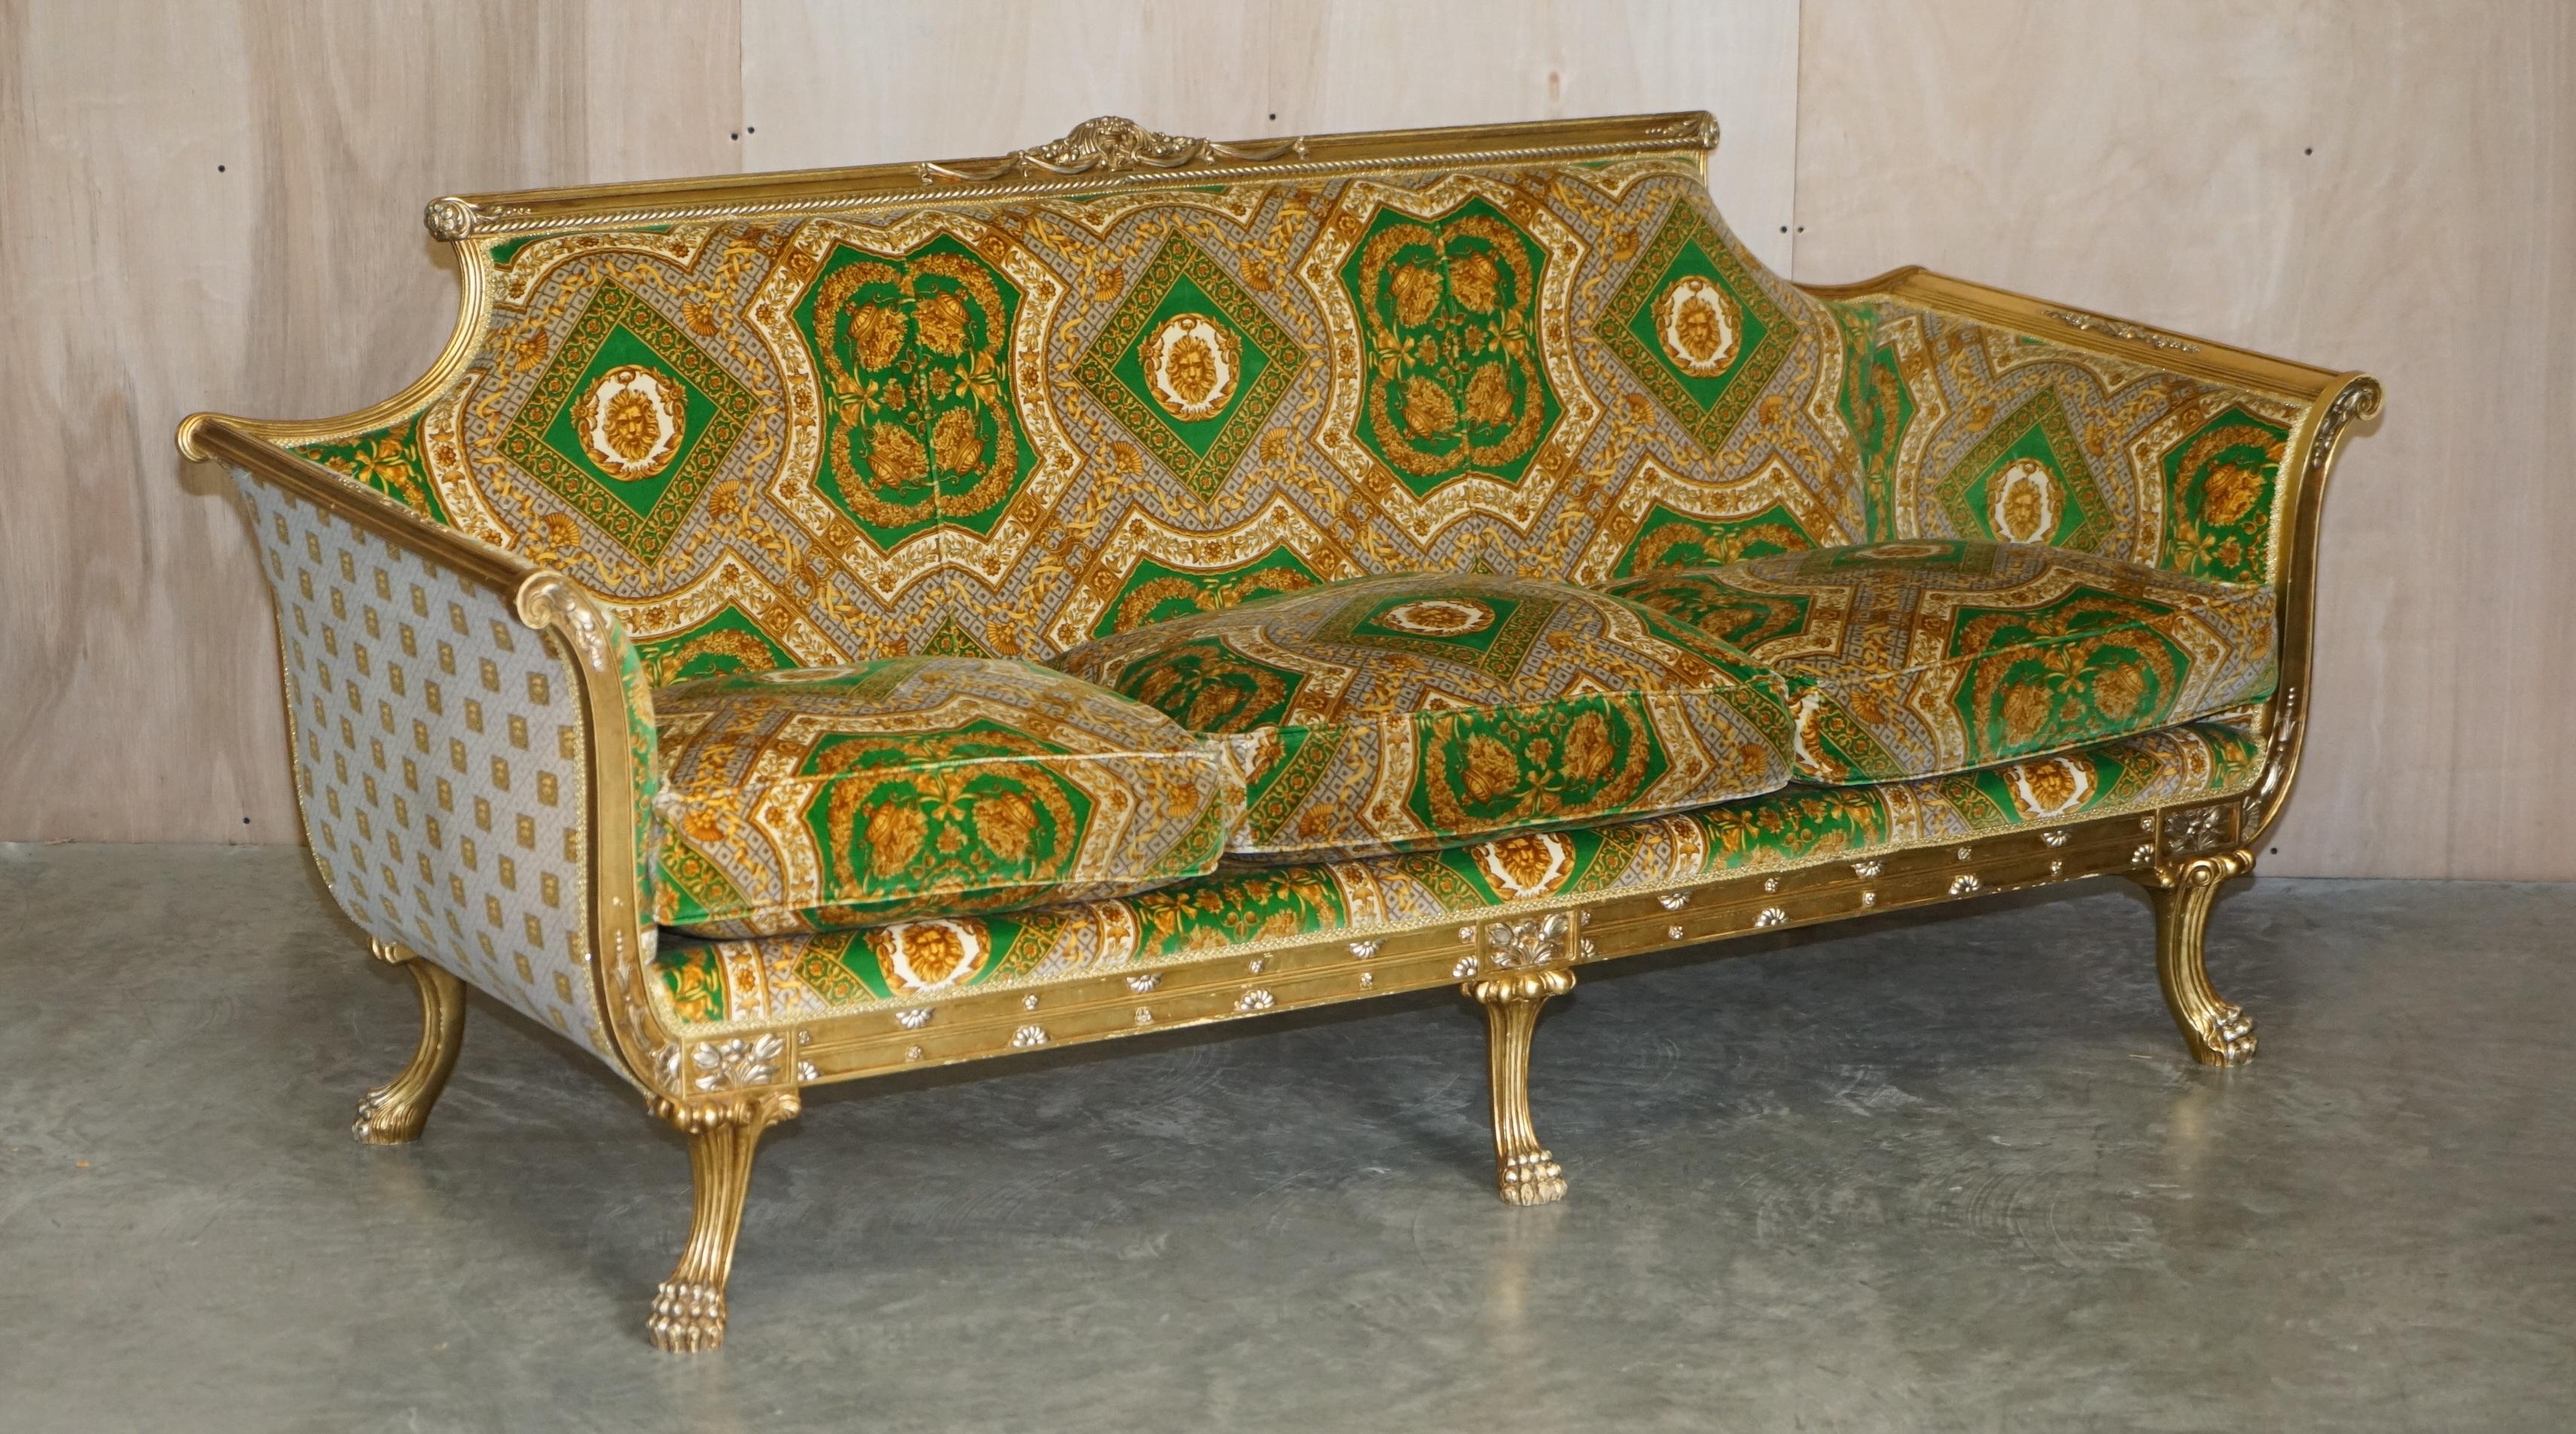 Versace Sofa - 13 For Sale on 1stDibs | versace couch, versace sofa for sale